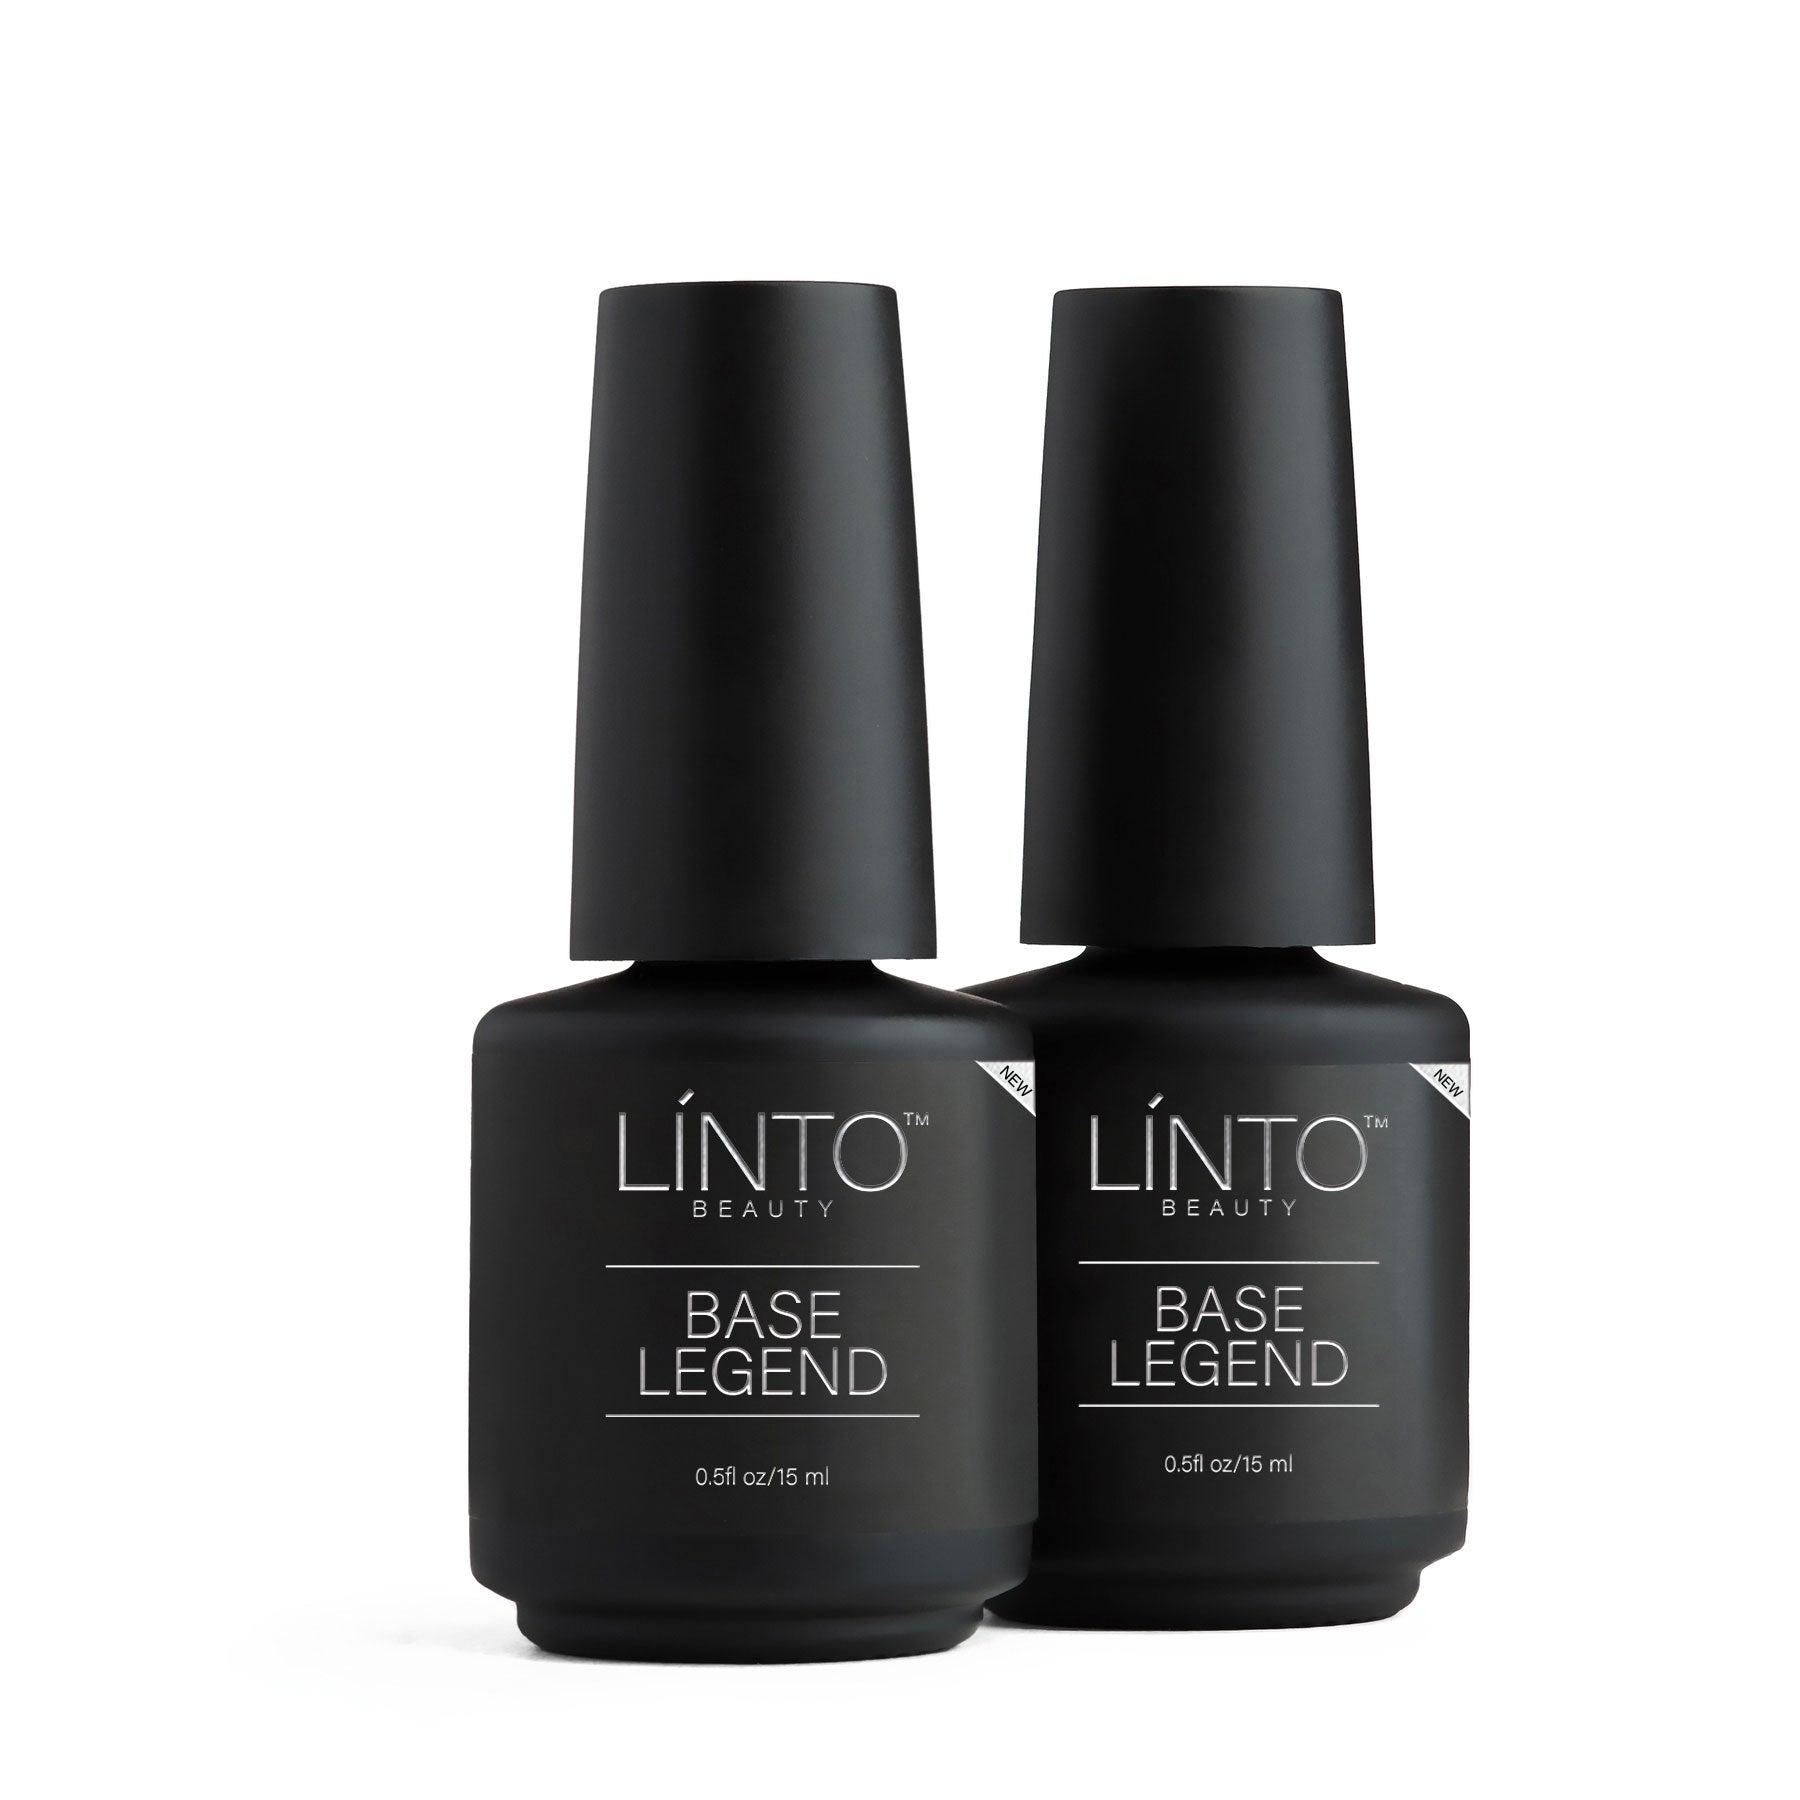 Base legend 15 ml by LiNTO